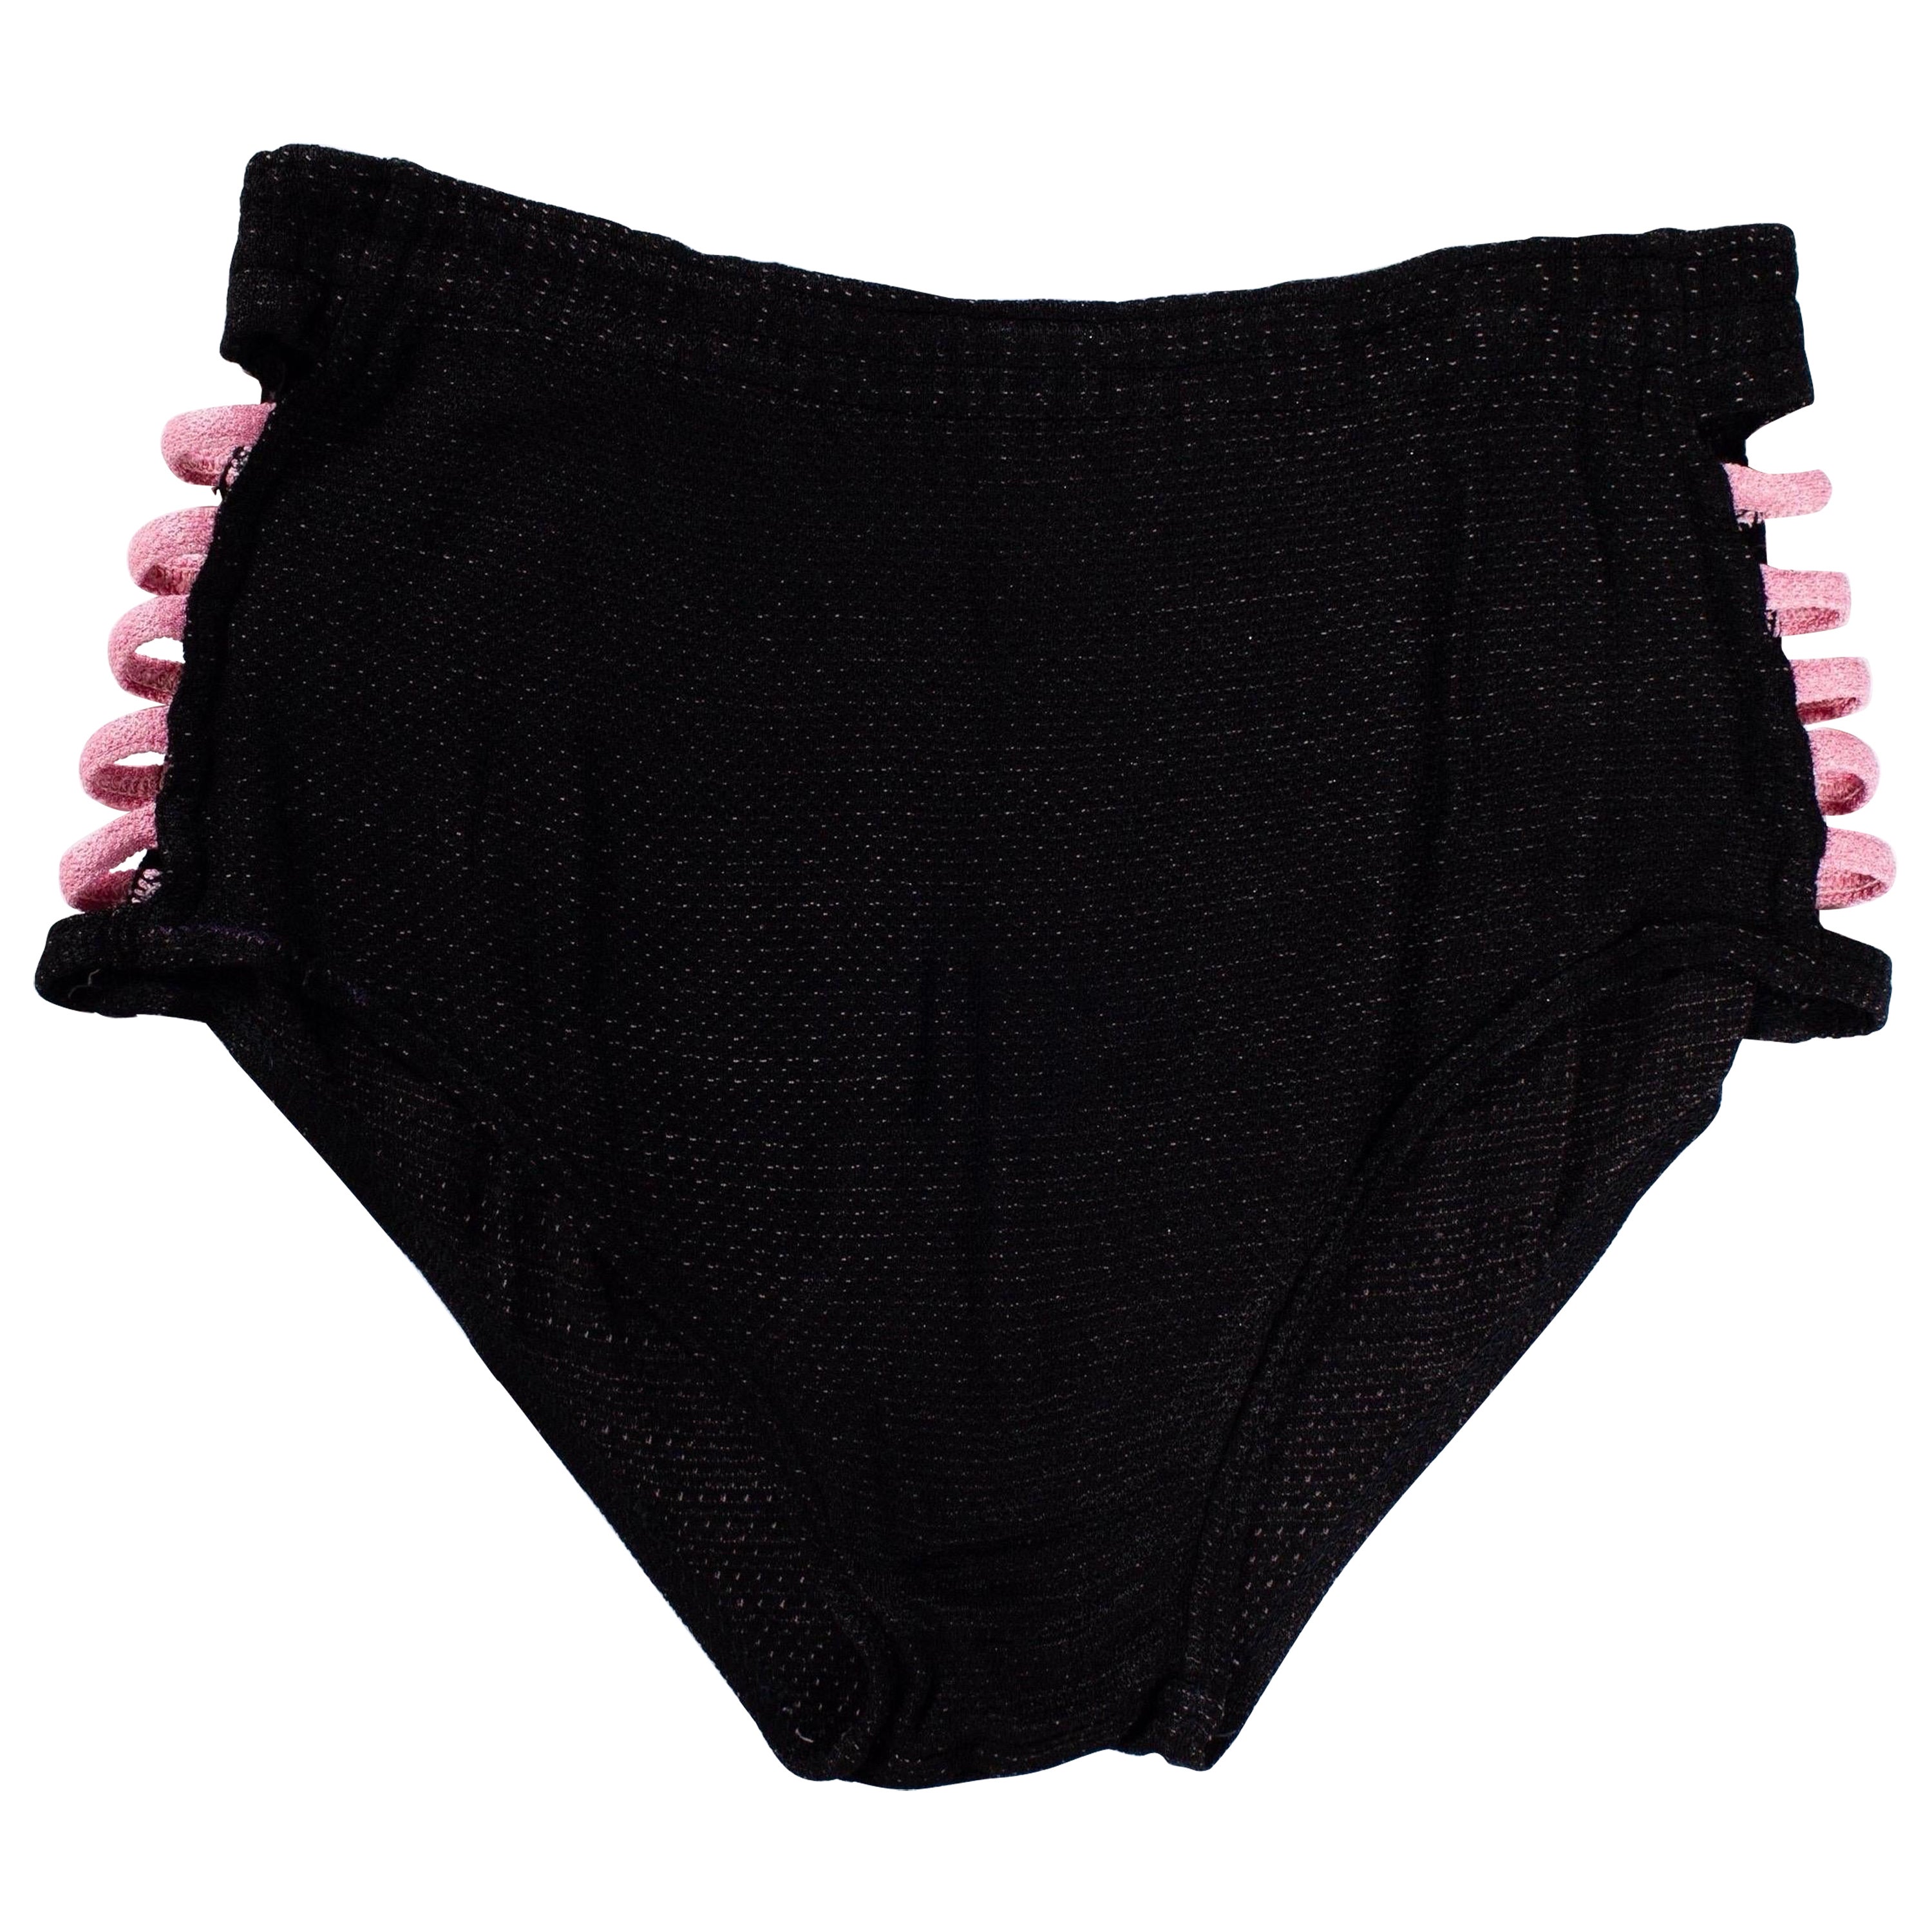 1940S Black & Pink Rayon Knit Men's Bathing Shorts With Side Cut Outs